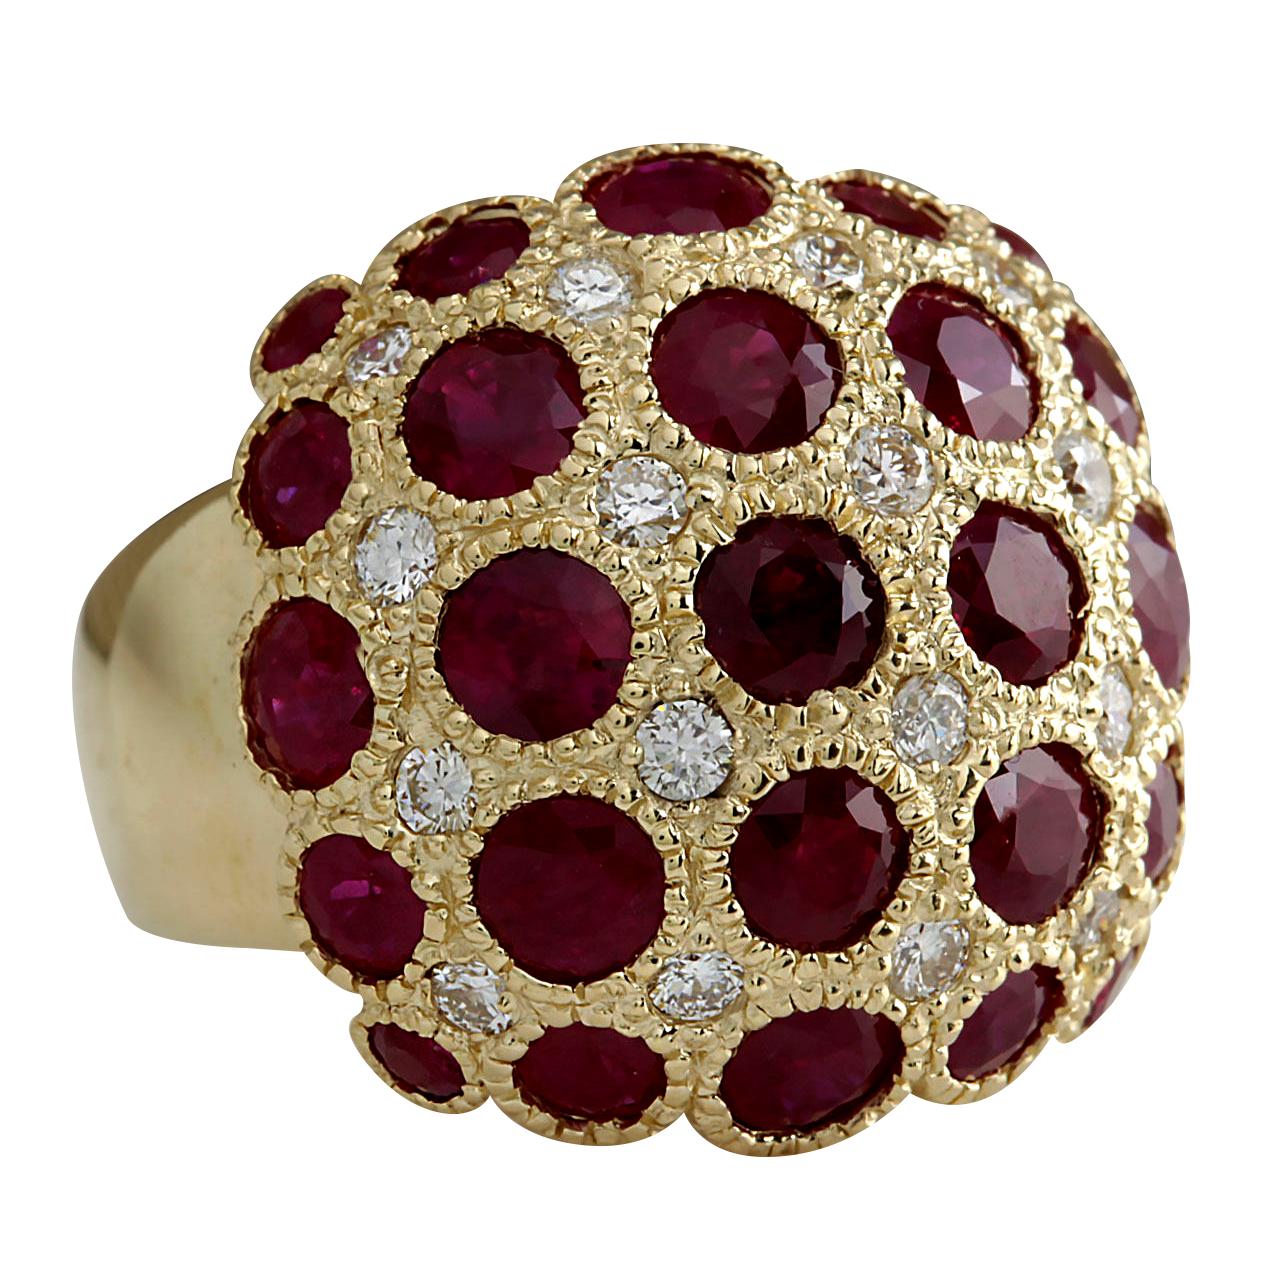 Stamped: 14K Yellow Gold
Total Ring Weight: 11.3 Grams
Total Natural Ruby Weight is 5.05 Carat
Color: Red
Total Natural Diamond Weight is 0.50 Carat
Color: F-G, Clarity: VS2-SI1
Face Measures: 20.15x19.35 mm
Sku: [702636W]